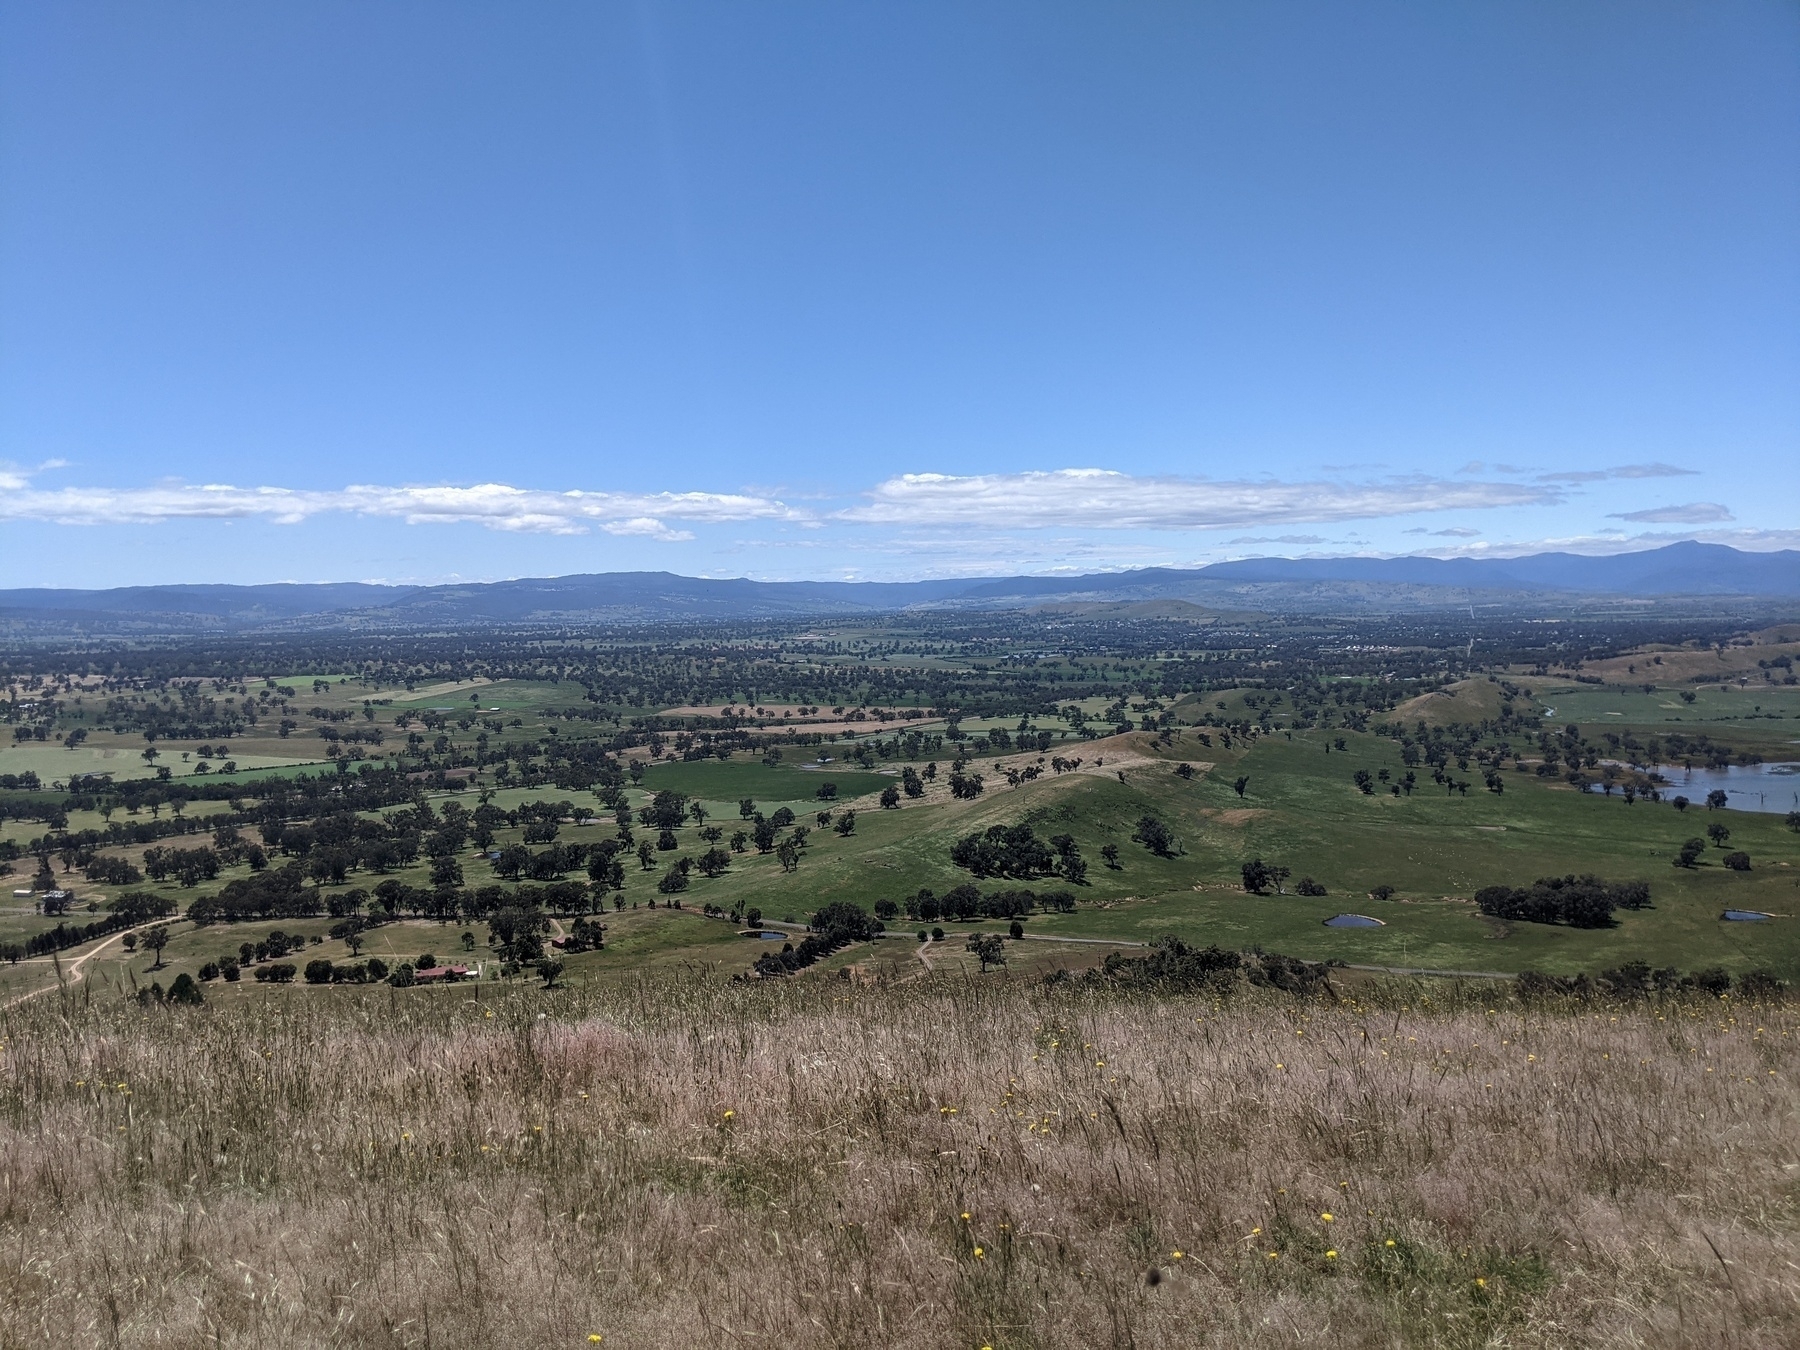 A panoramic view from the Paps, a high hill, of rolling hills dotted with trees and in the distance mountain range. There is a dam on the right.